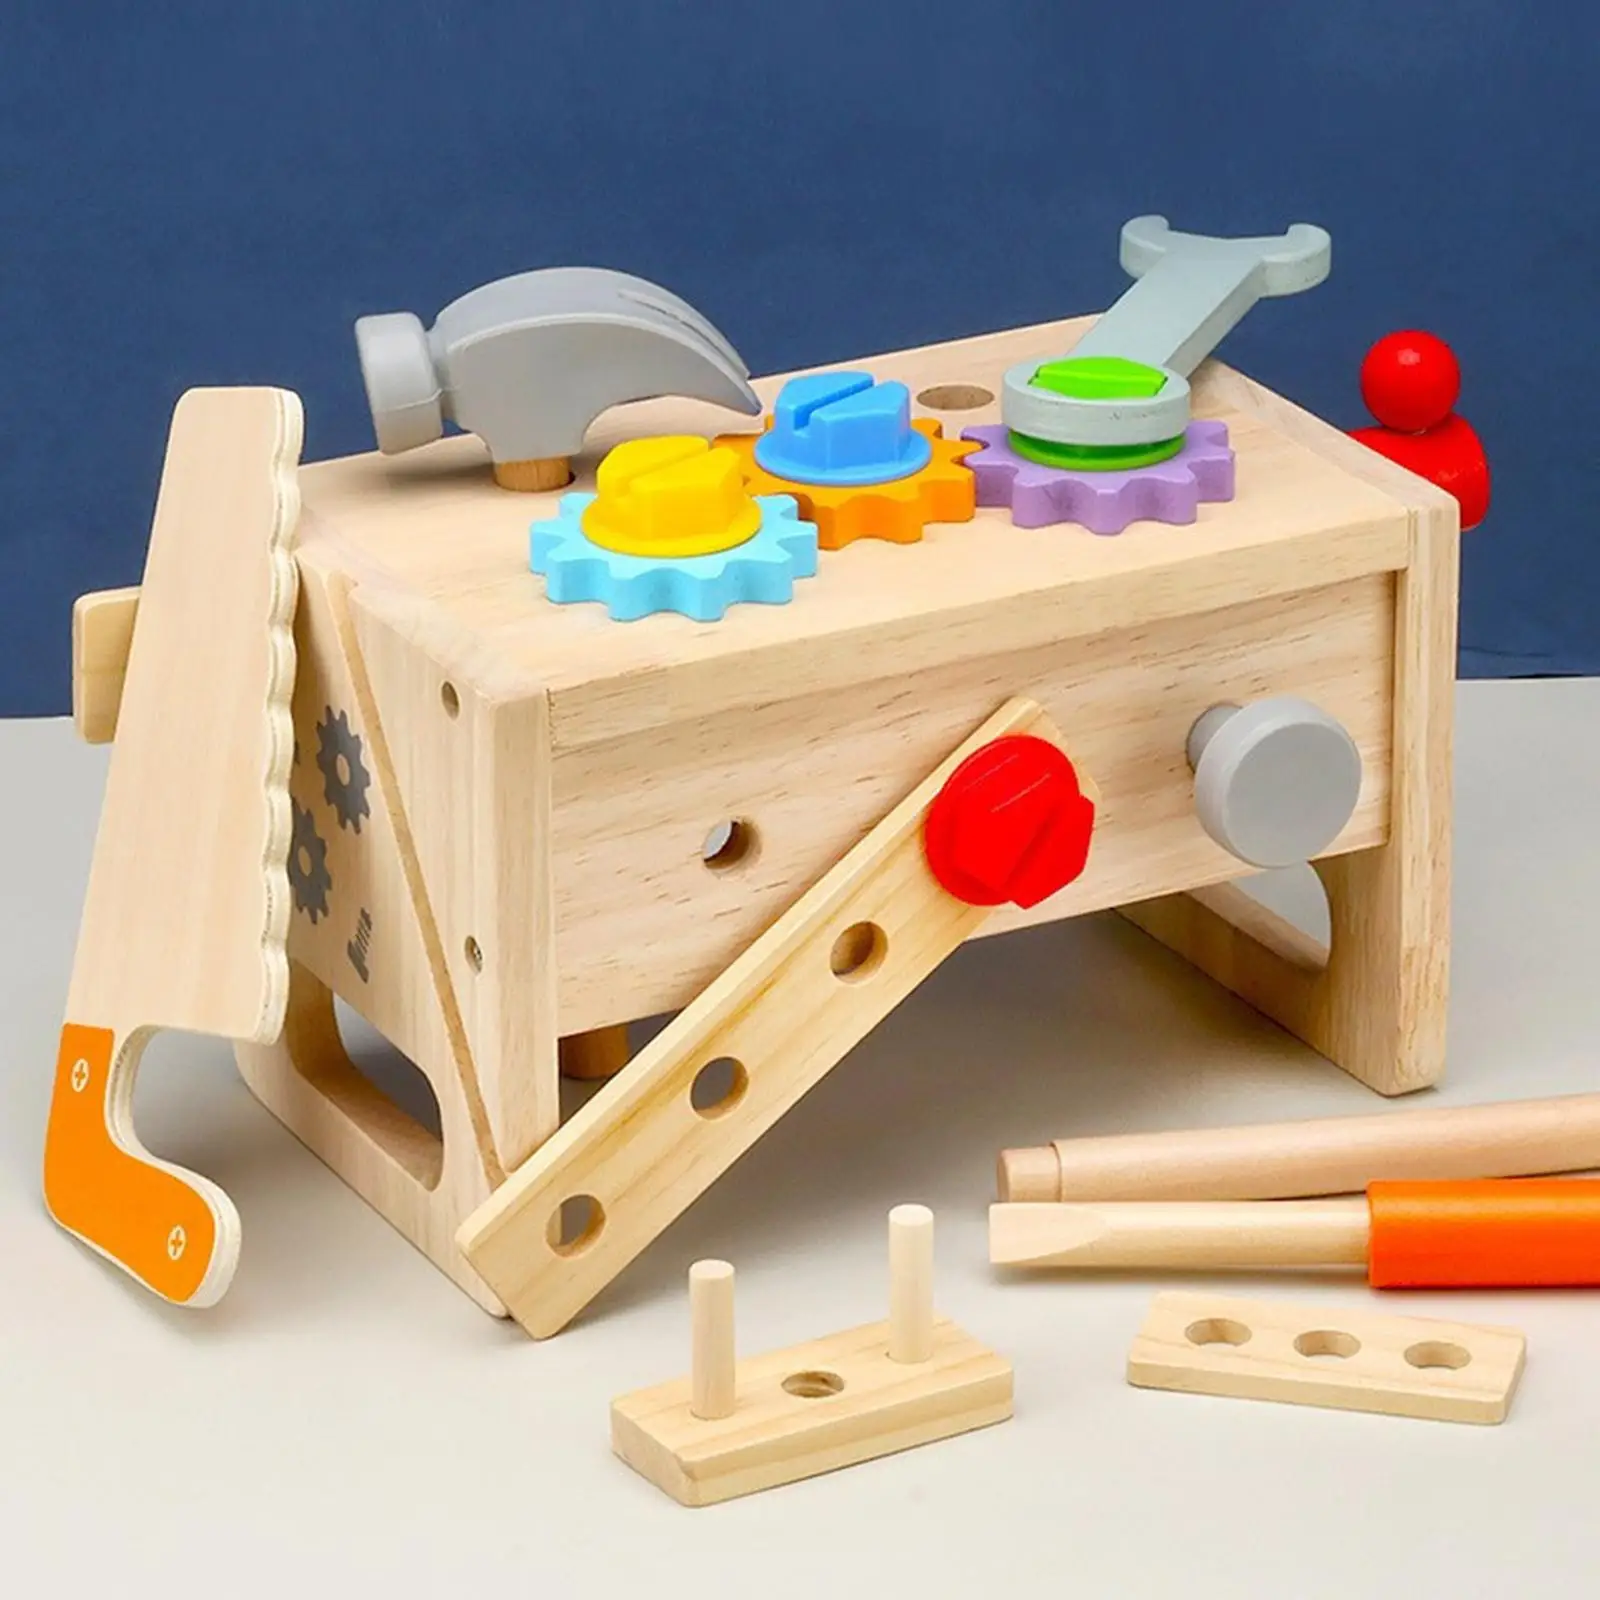 

Early Education Toys No Burrs Detachable Baby Learing Parts Wooden DIY Variety Nuts Building Blocks Nut Disassembly Assembly